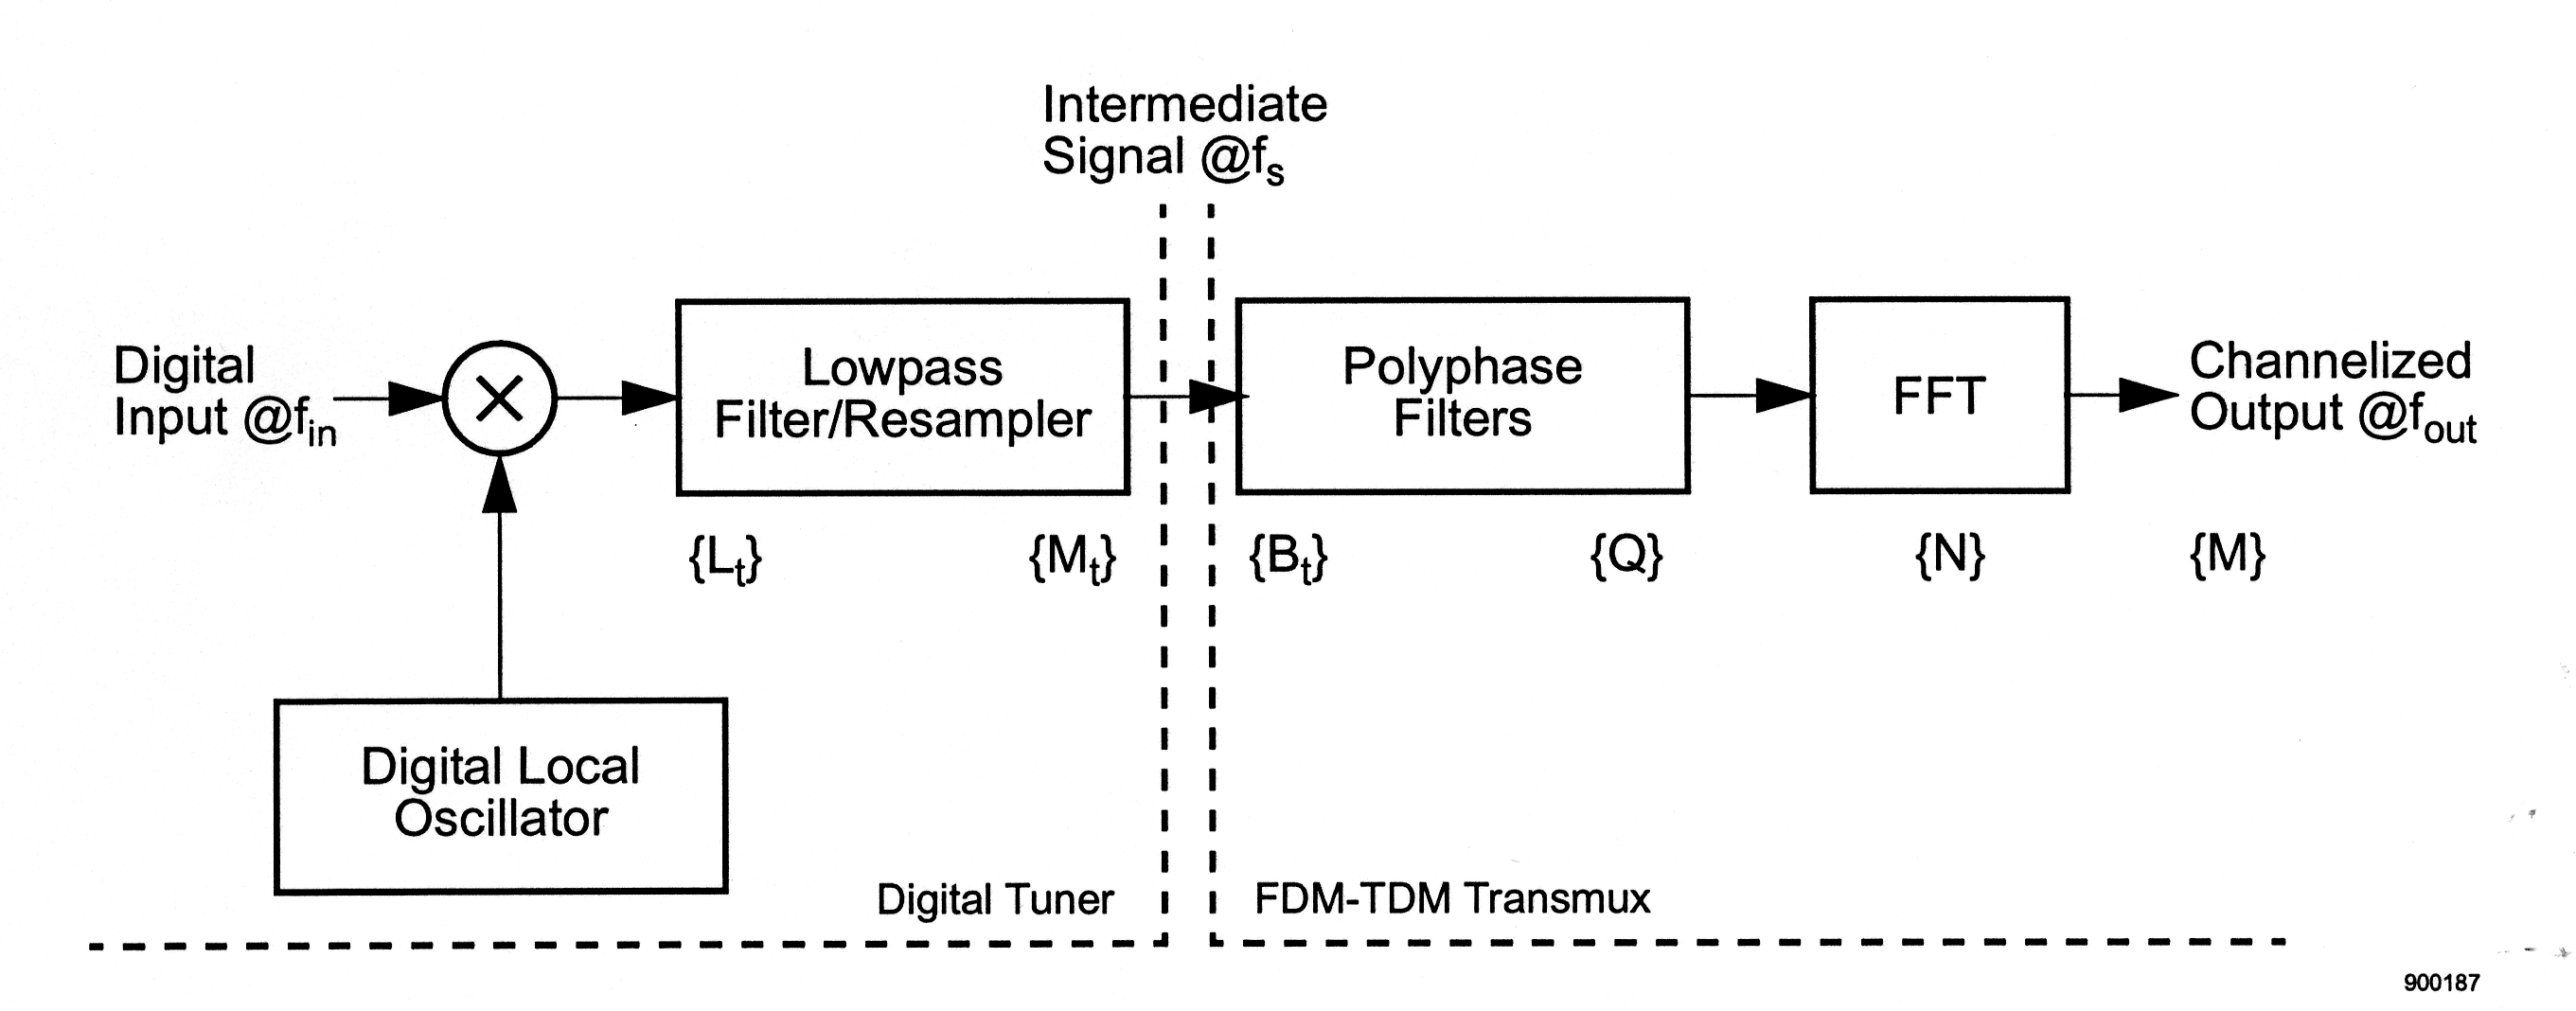 Figure one is a flowchart. Beginning on the left, a caption reads Digital Input @f_in. An arrow points to the right from the caption at a circle containing a large x. A rectangle below, titled Digital Local Oscillator, contains an arrow that points upward at the circle. To the right of the circle is an arrow pointing right at a rectangle labeled Lowpass Filter/Resampler. Below this rectangle on the left is the caption {L_t}, and below to the right is the caption {M_t}. This half of the flowchart is labeled Digital Tuner. Above the center of the figure is the caption Intermediate Signal @f_s. To the right of the aforementioned rectangle is an arrow pointing to the right at another rectangle, labeled Polyphase Filters. Below this rectangle and to the left is the label {B_t}, and below the rectangle to the right is the label {Q}. This rectangle is followed by another arrow pointing to the right at another rectangle, labeled FFT. Below this rectangle is the label {N}. To the right of this rectangle is an arrow pointing to the right at the caption Channelized Output @f_out. Below the caption is the label {M}. The right side of this flowchart is labeled FDM-TDM Transmux.